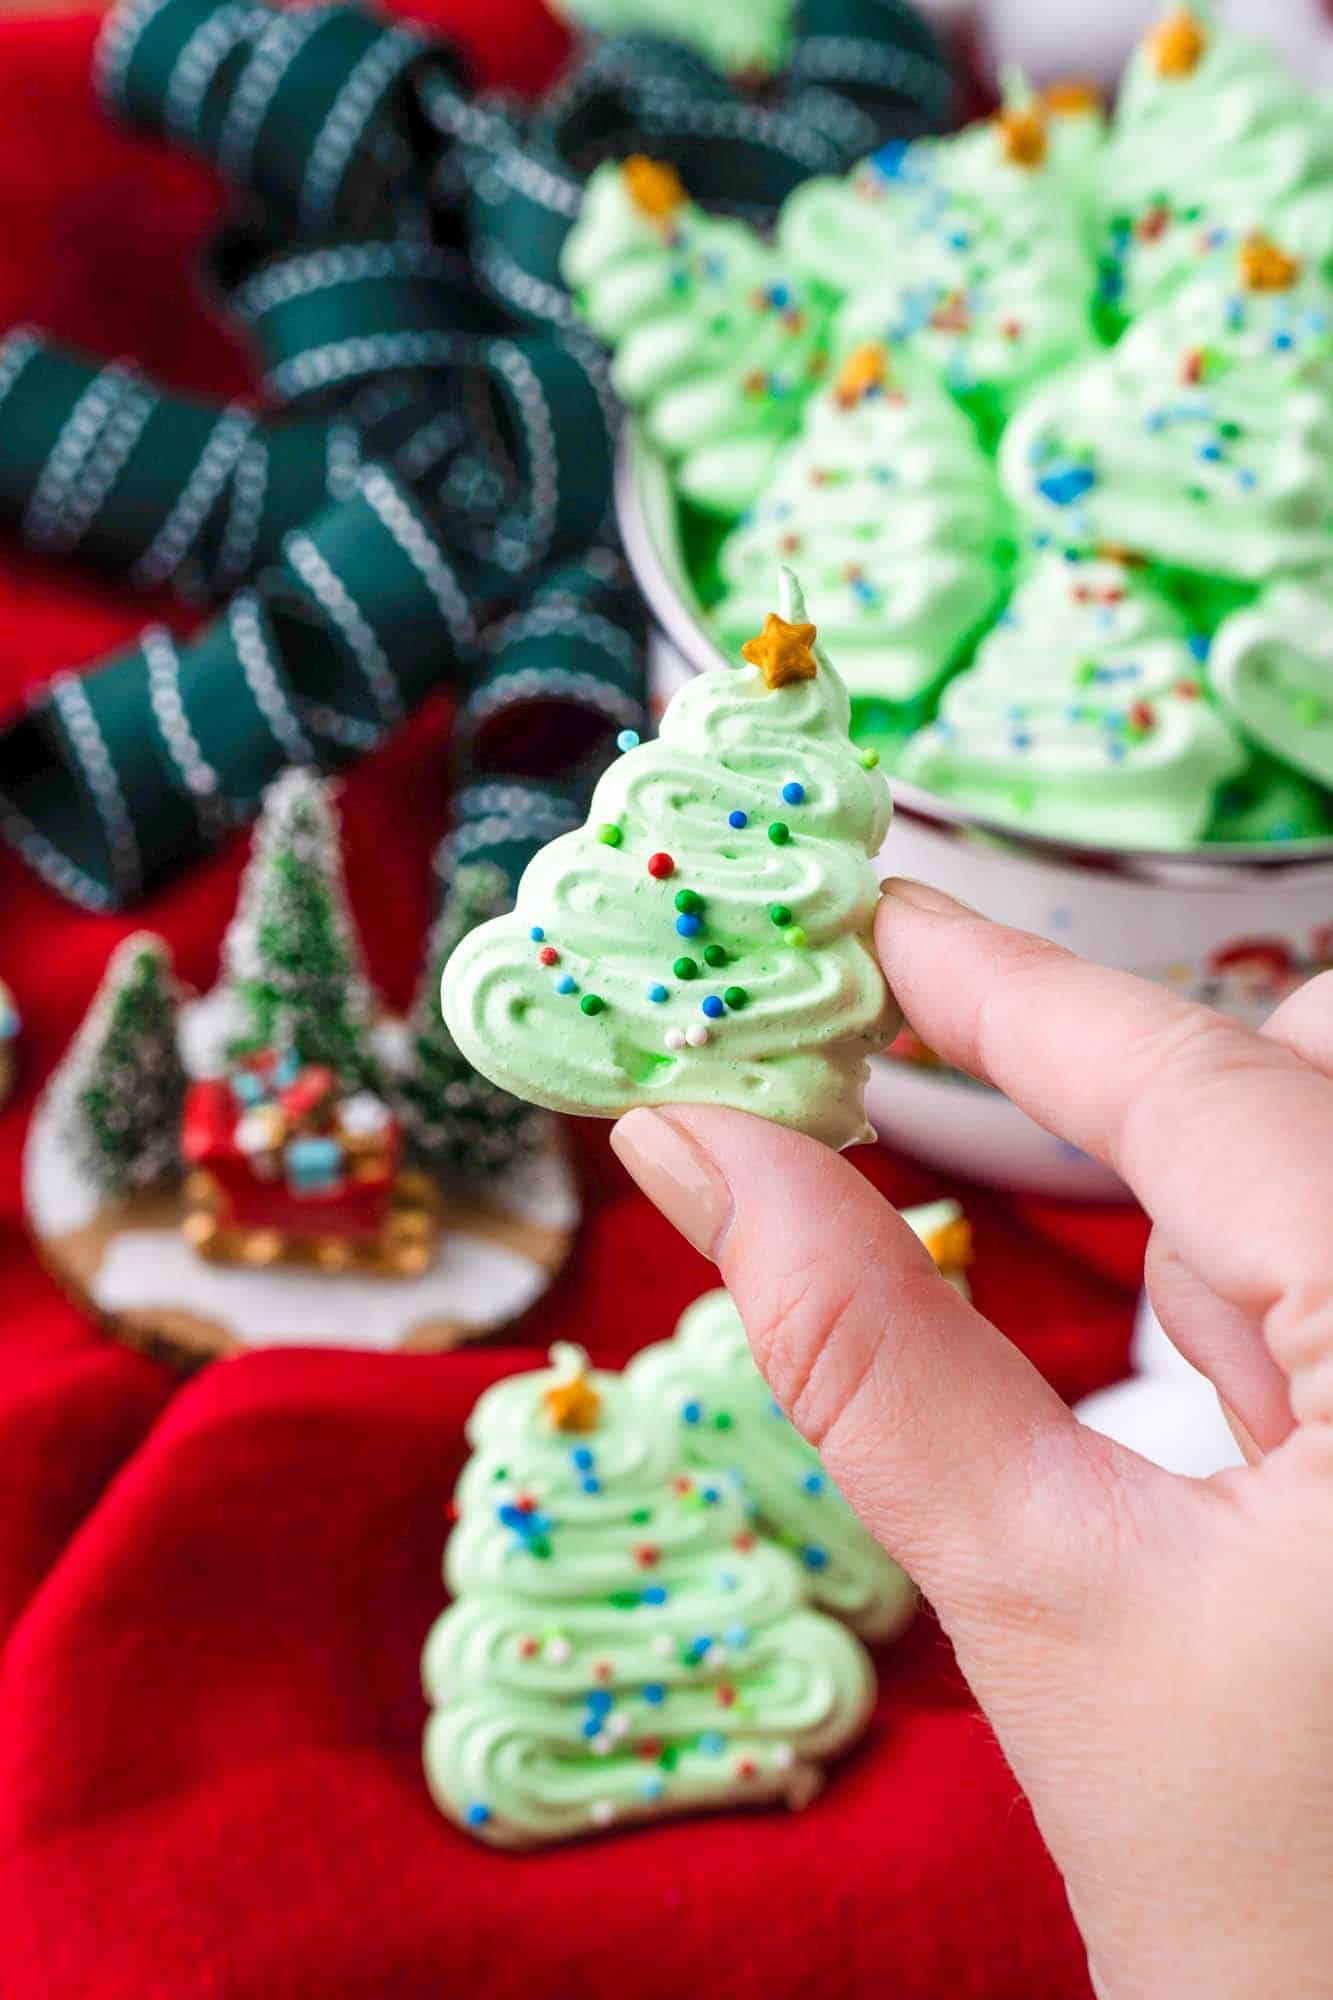 Holding a meringue cookie shaped like a Christmas tree and decorated with sprinkles